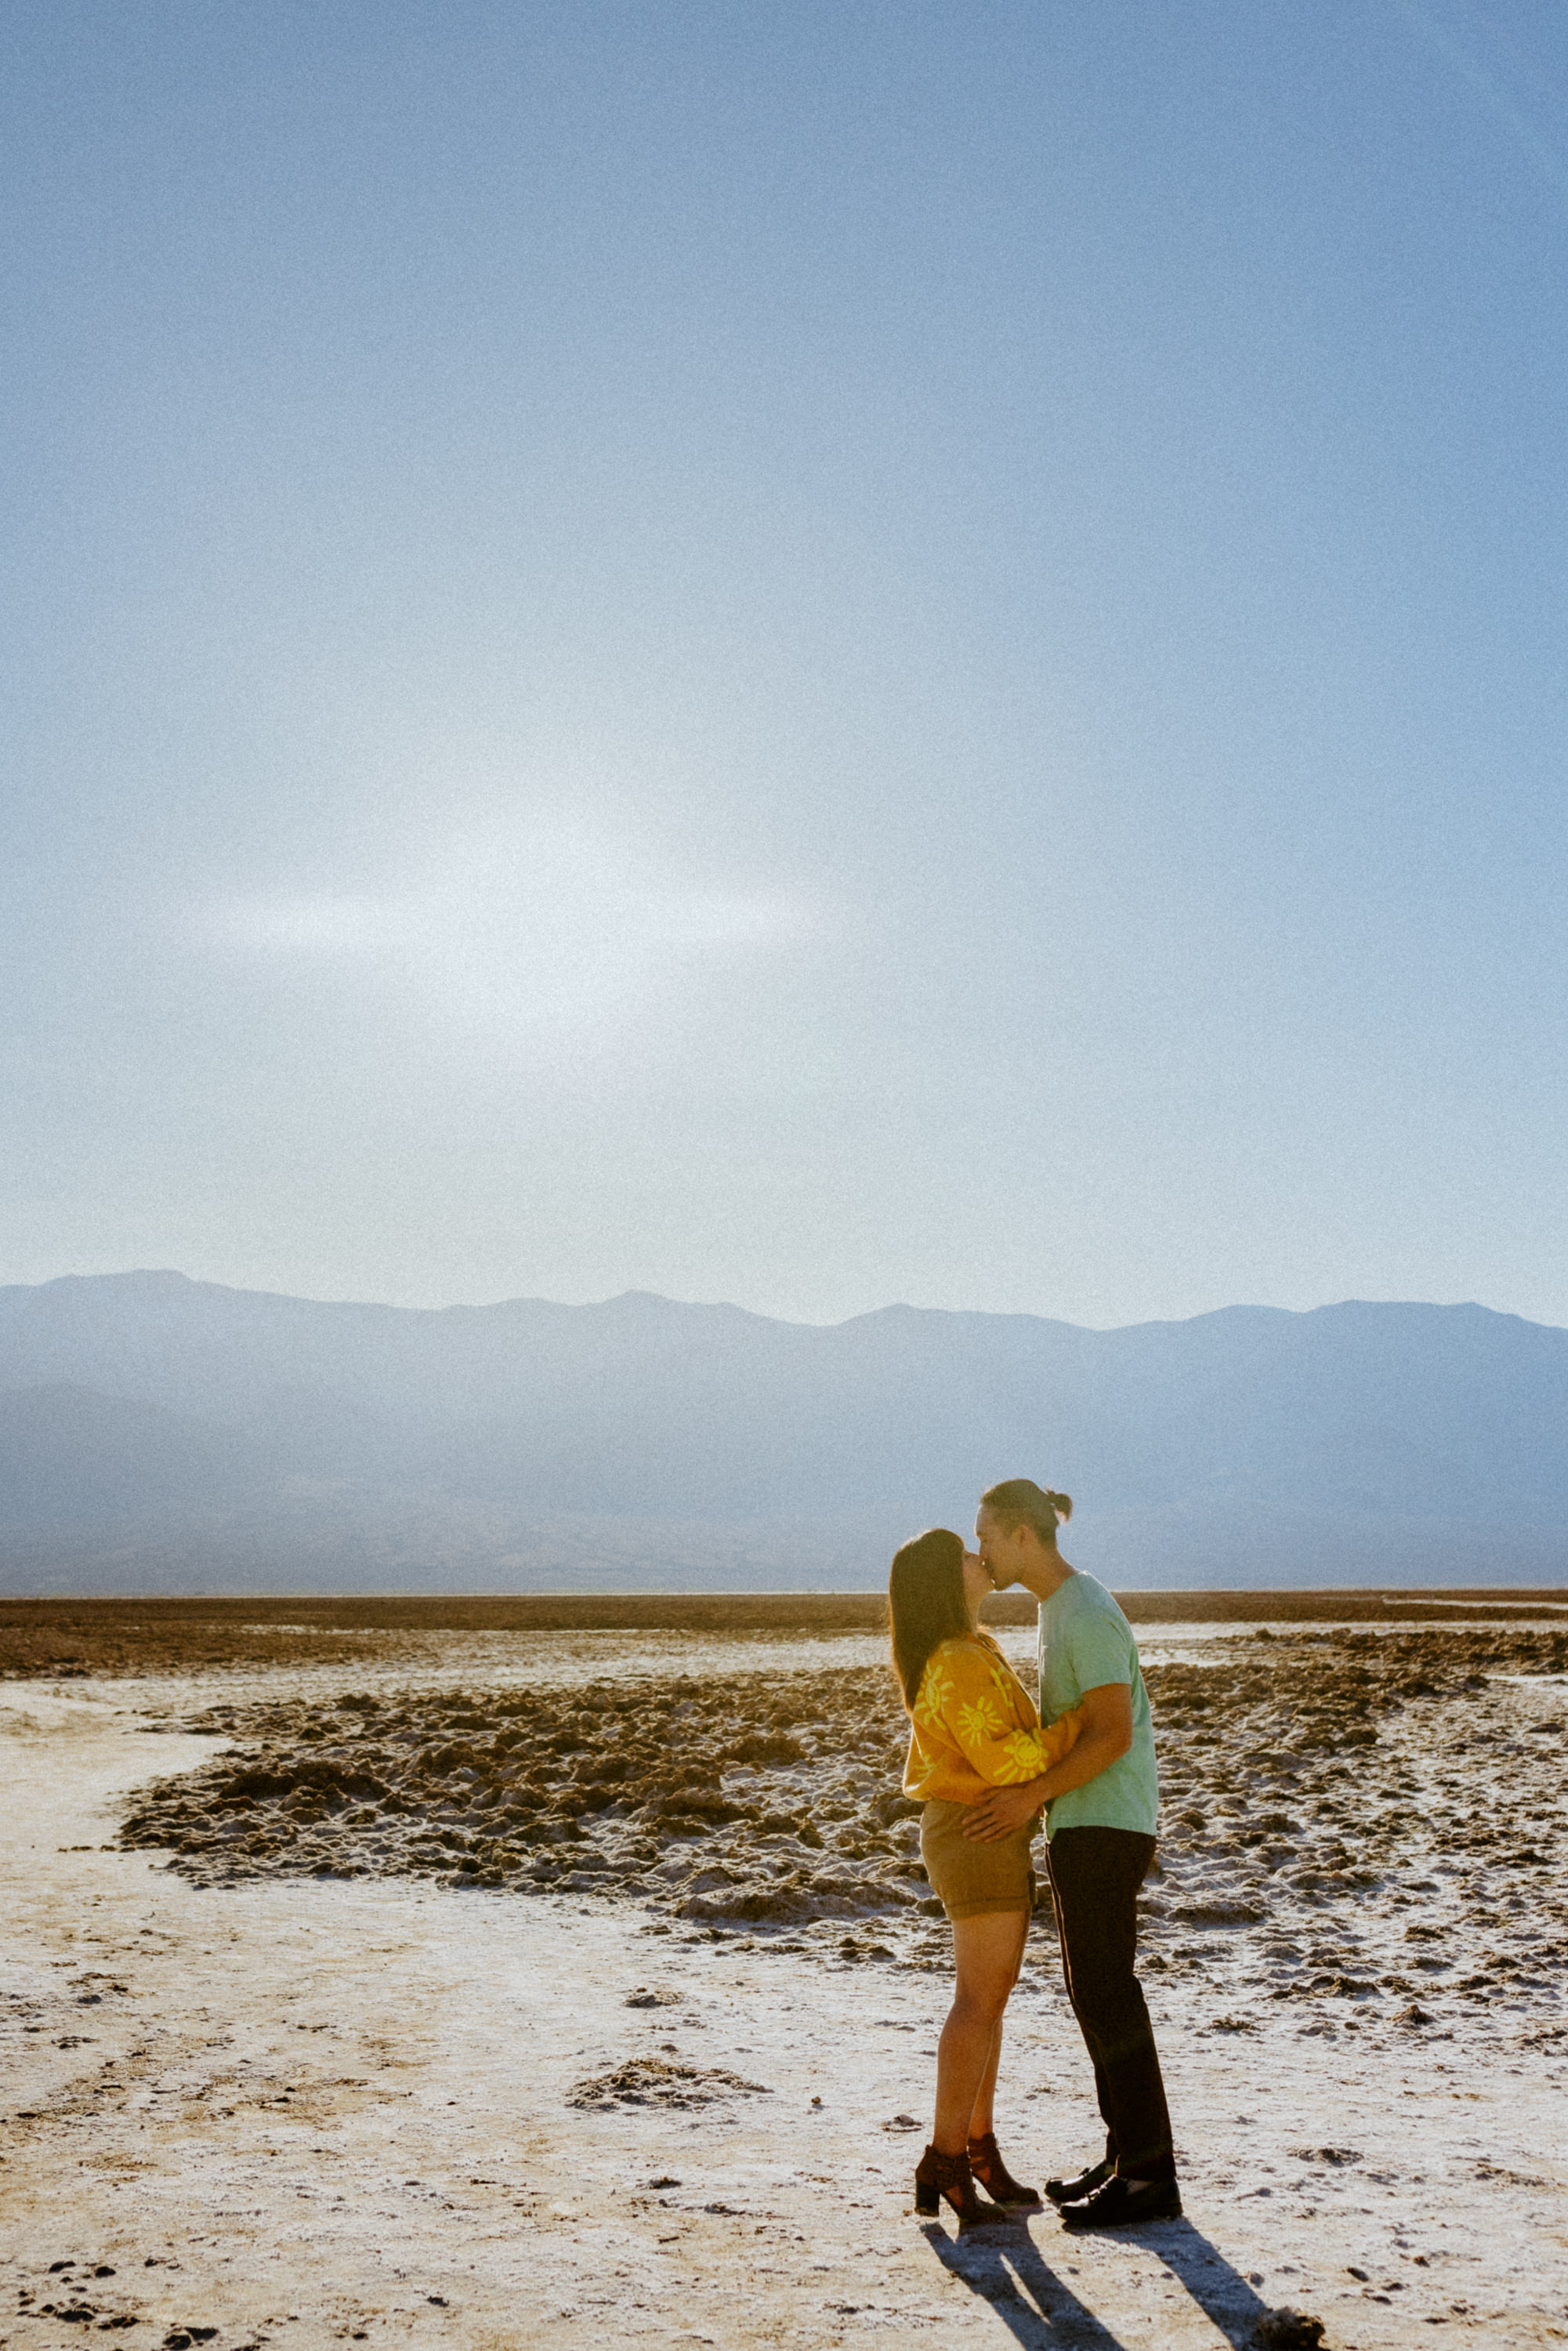 Candid shot of the couple sharing a kiss as they are surrounded by the salt flats for their Death Valley National Park engagement session.